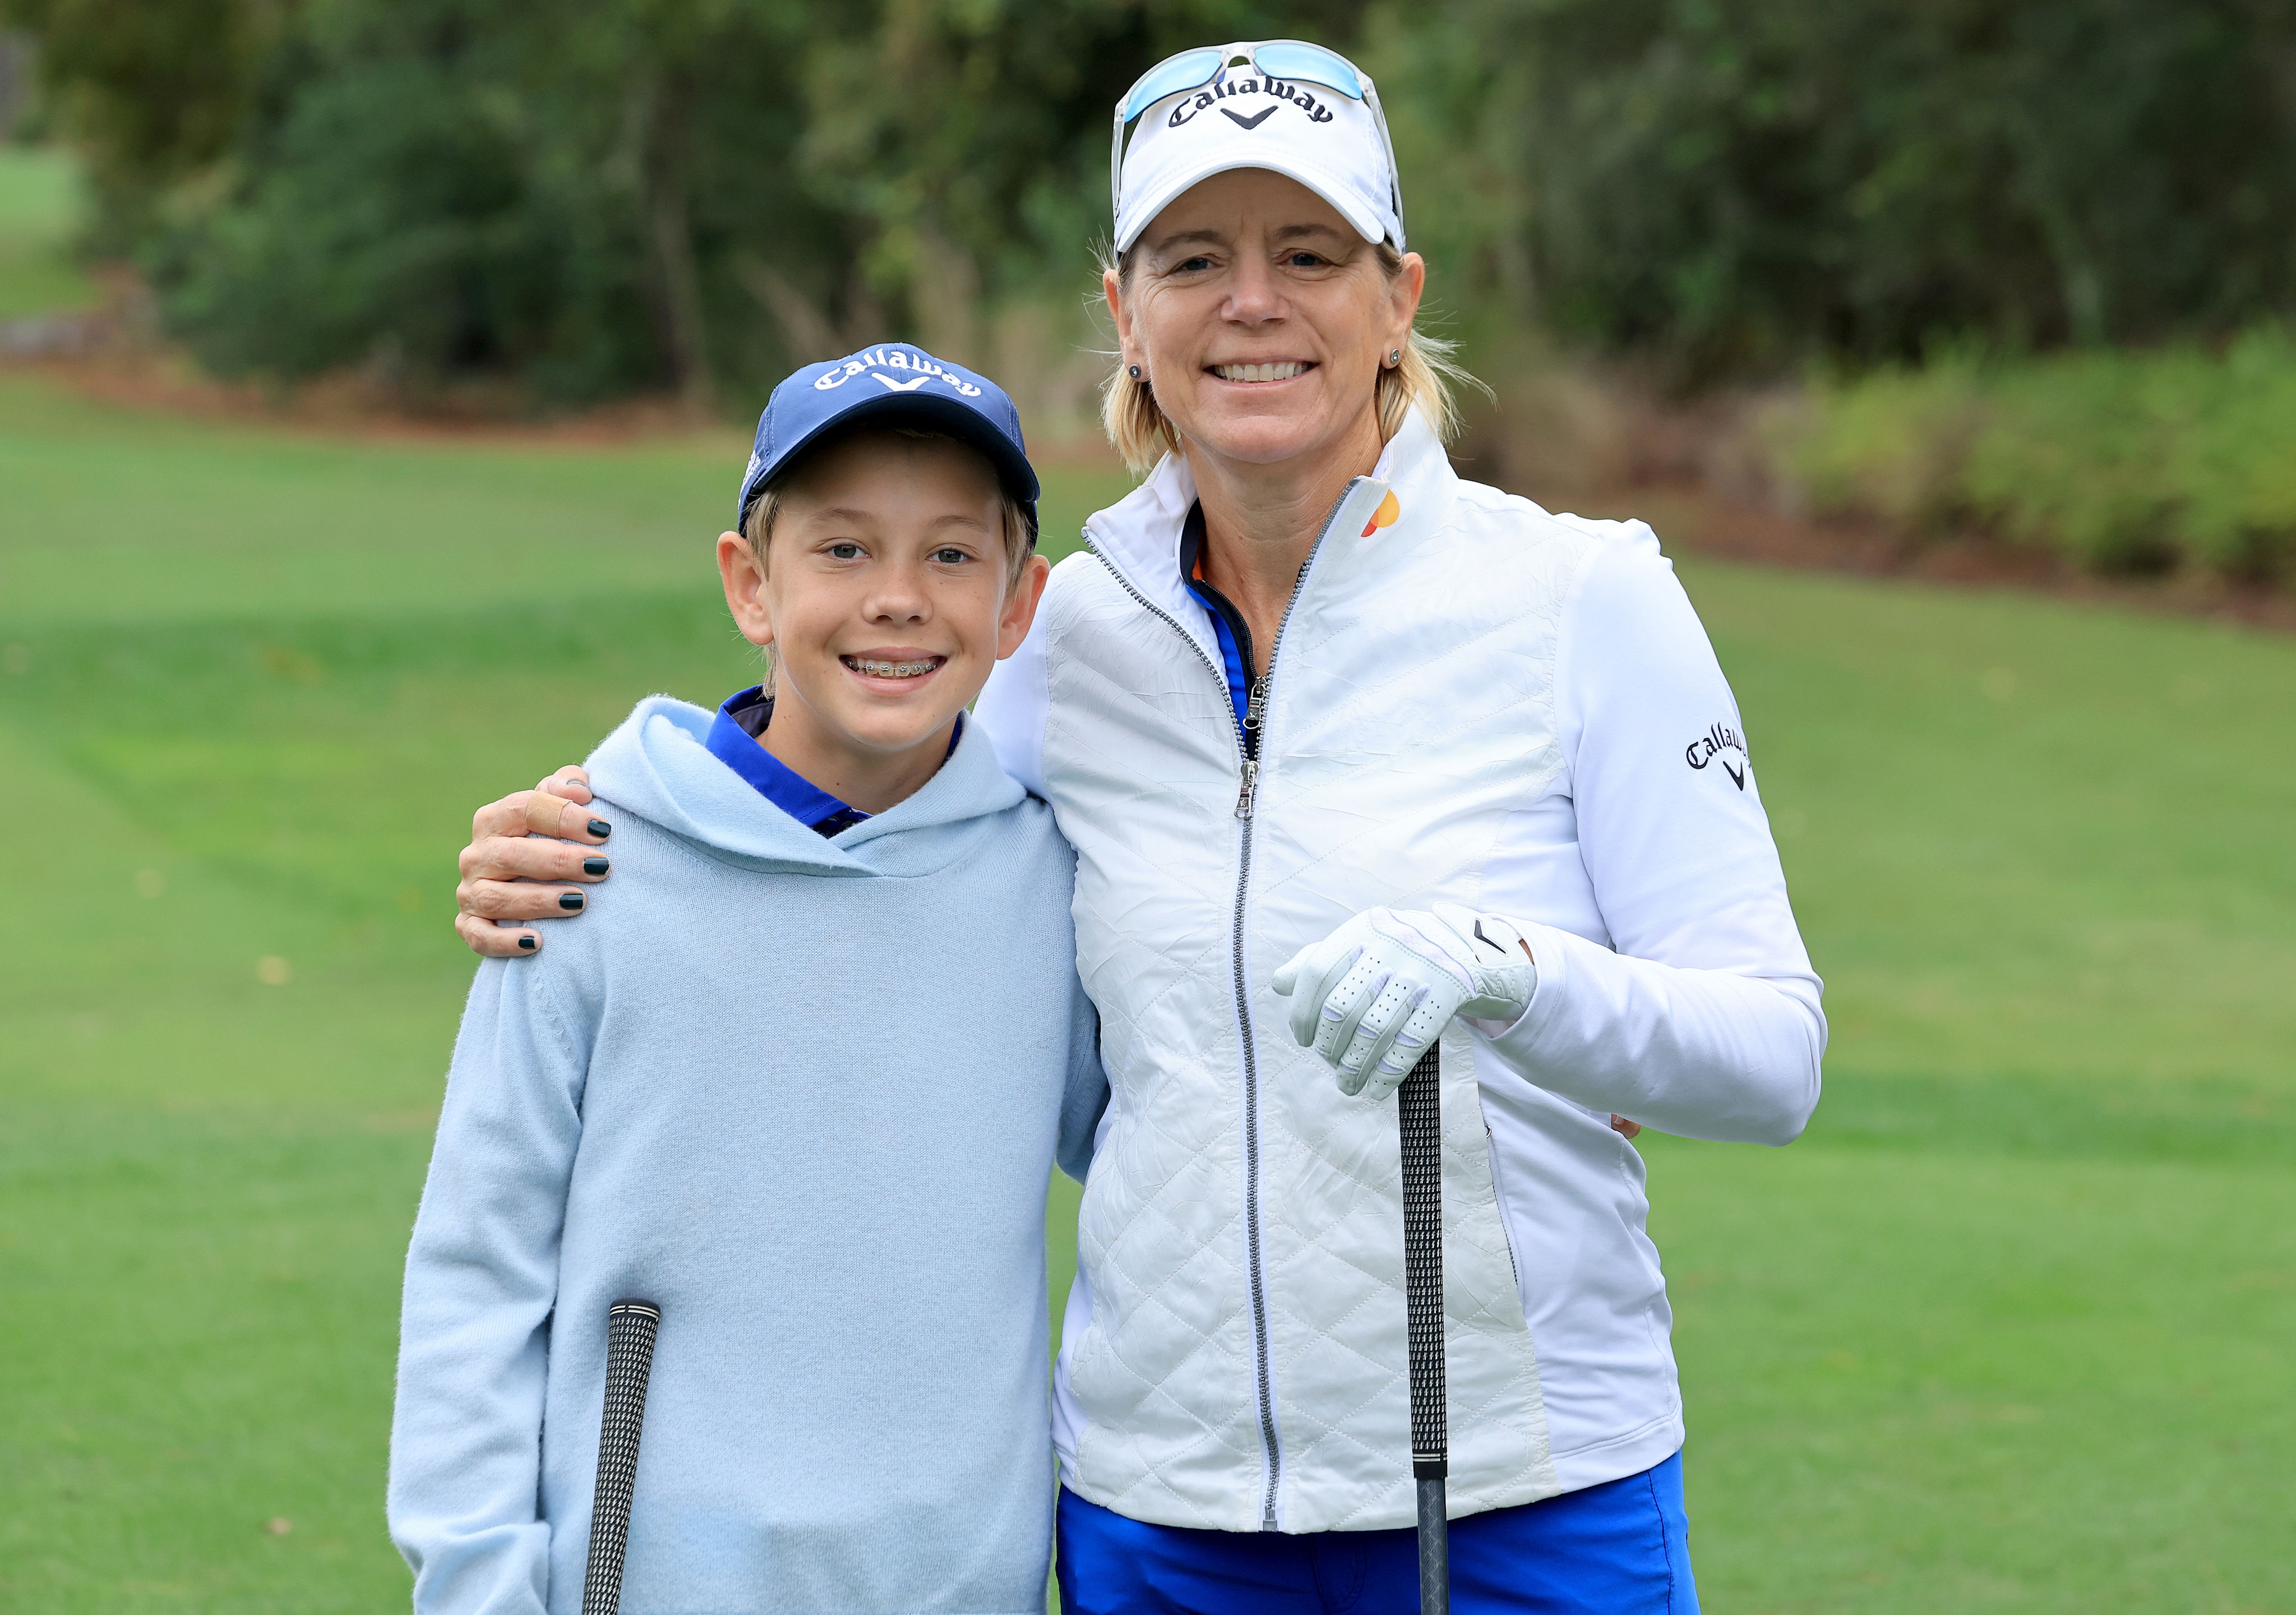 annika sorenstam's son will mcgee once again steals show on sunday at pnc championship